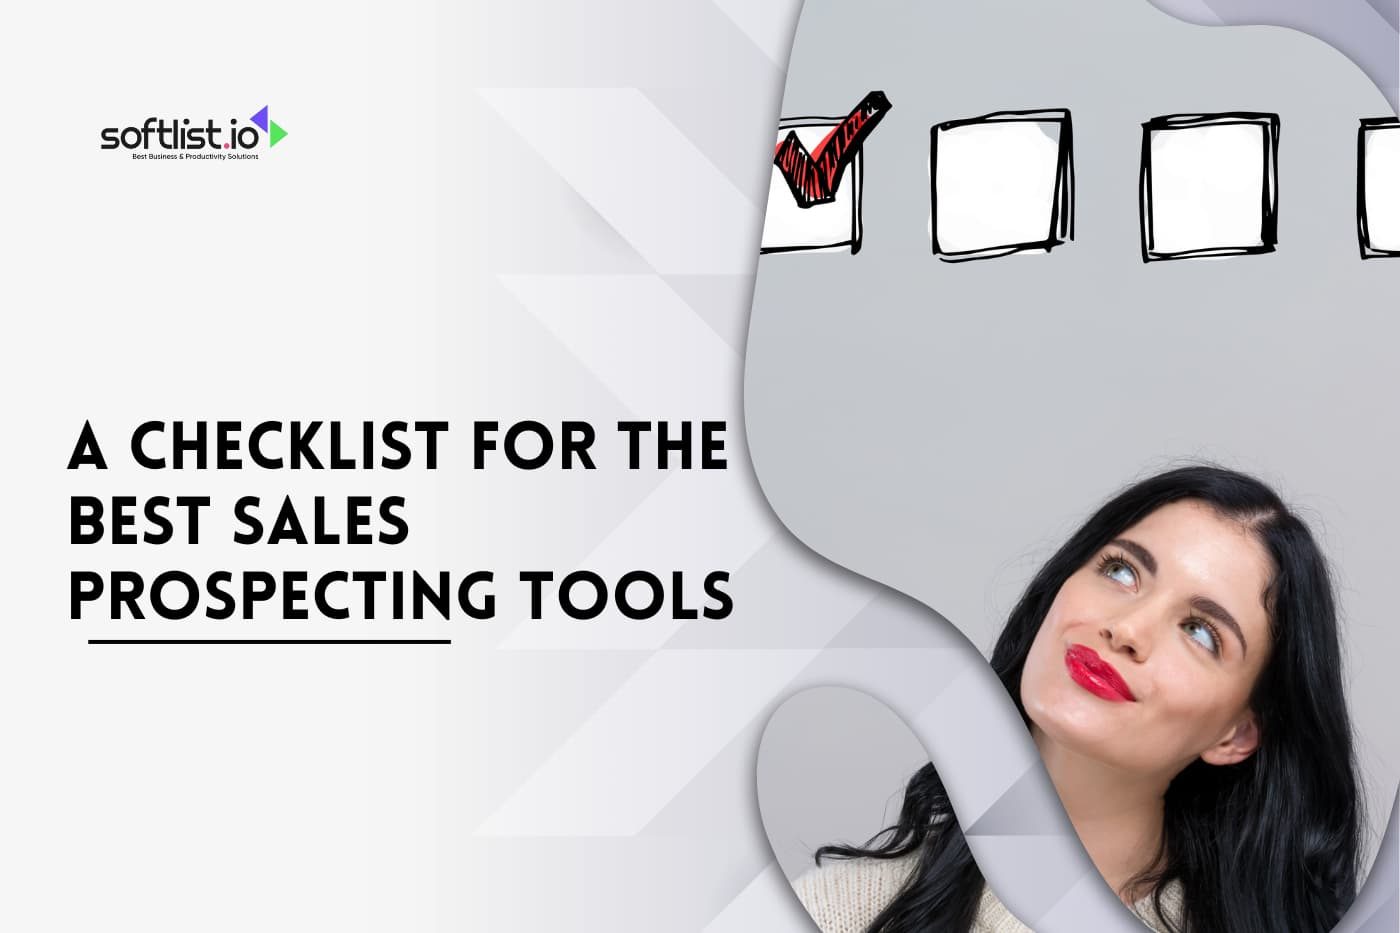 A Checklist for the Best Sales Prospecting Tools